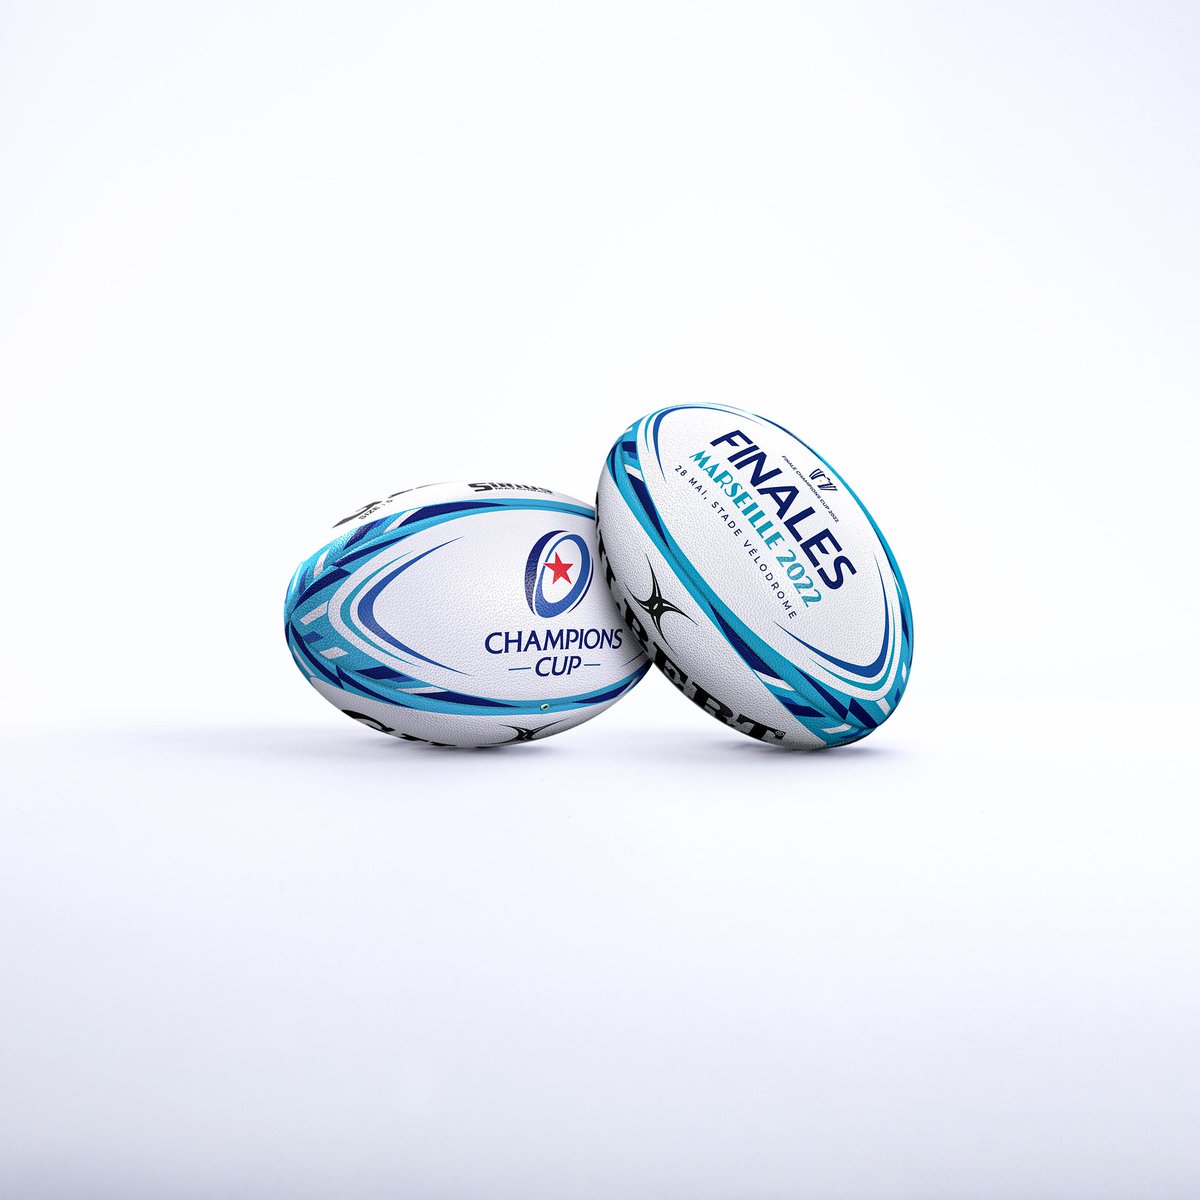 test Twitter Media - We're excited to see these launched around Stade Vélodrome on Friday and Saturday! 🤩

#HeinekenChampionsCup | #ChallengeCupRugby https://t.co/K3D2v6ff9z